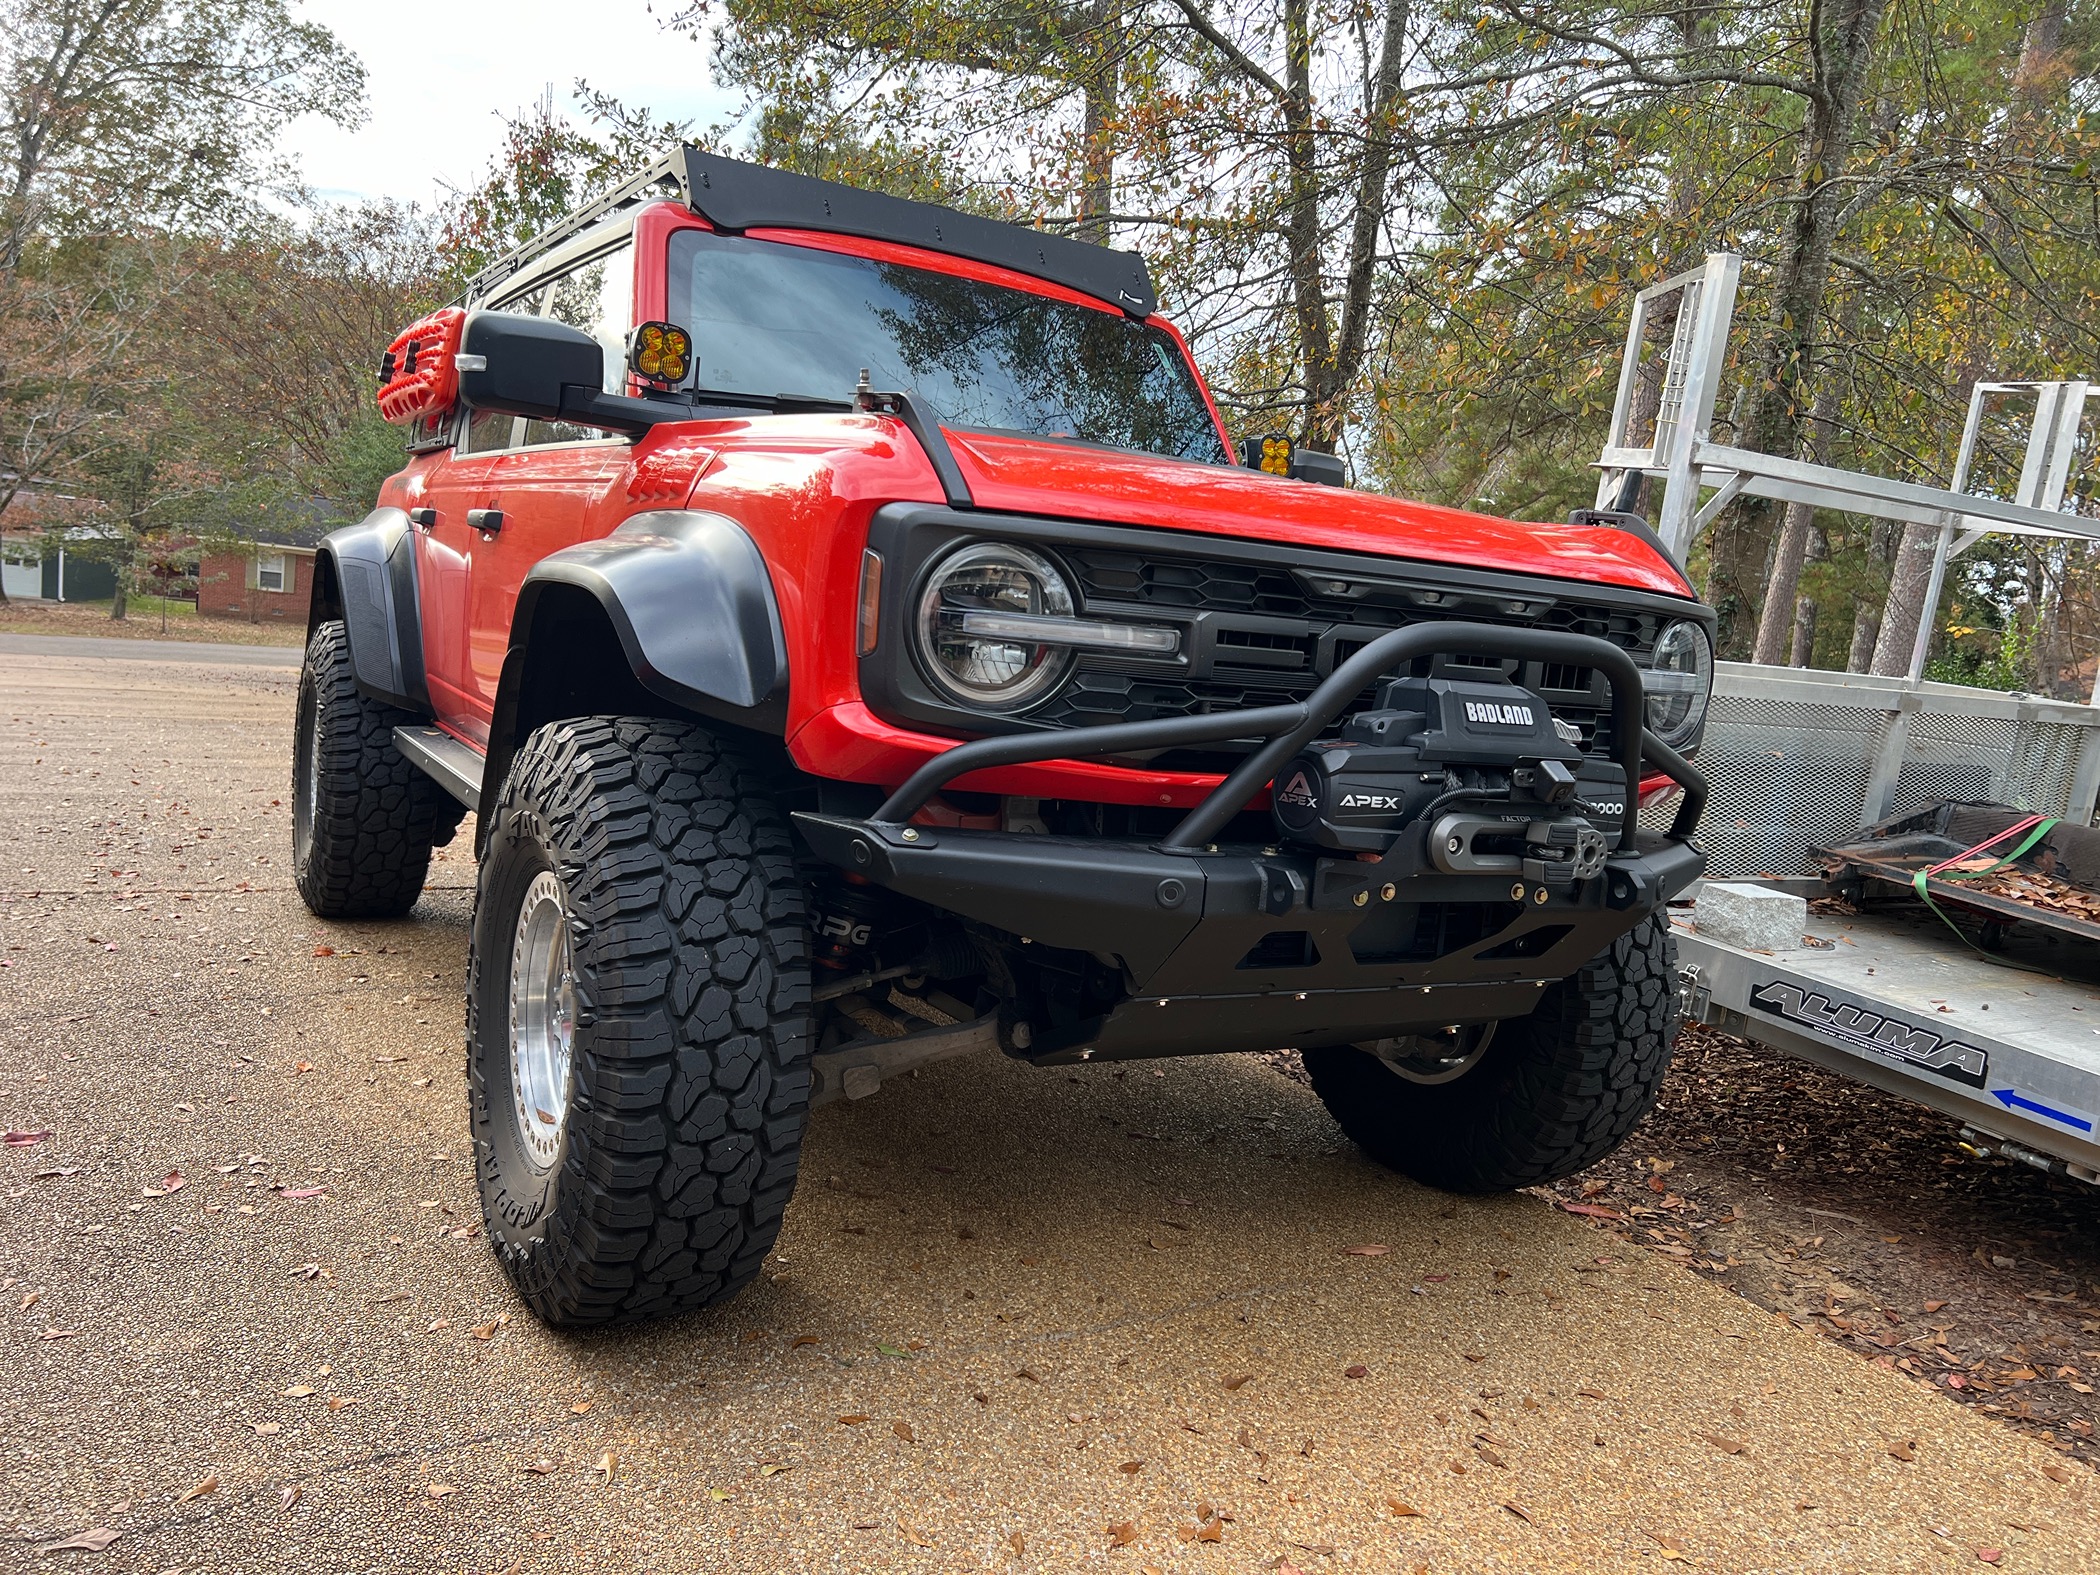 Ford Bronco 2x1 Tuesday! Let's see those before & after photos. IMG_9768.JPG